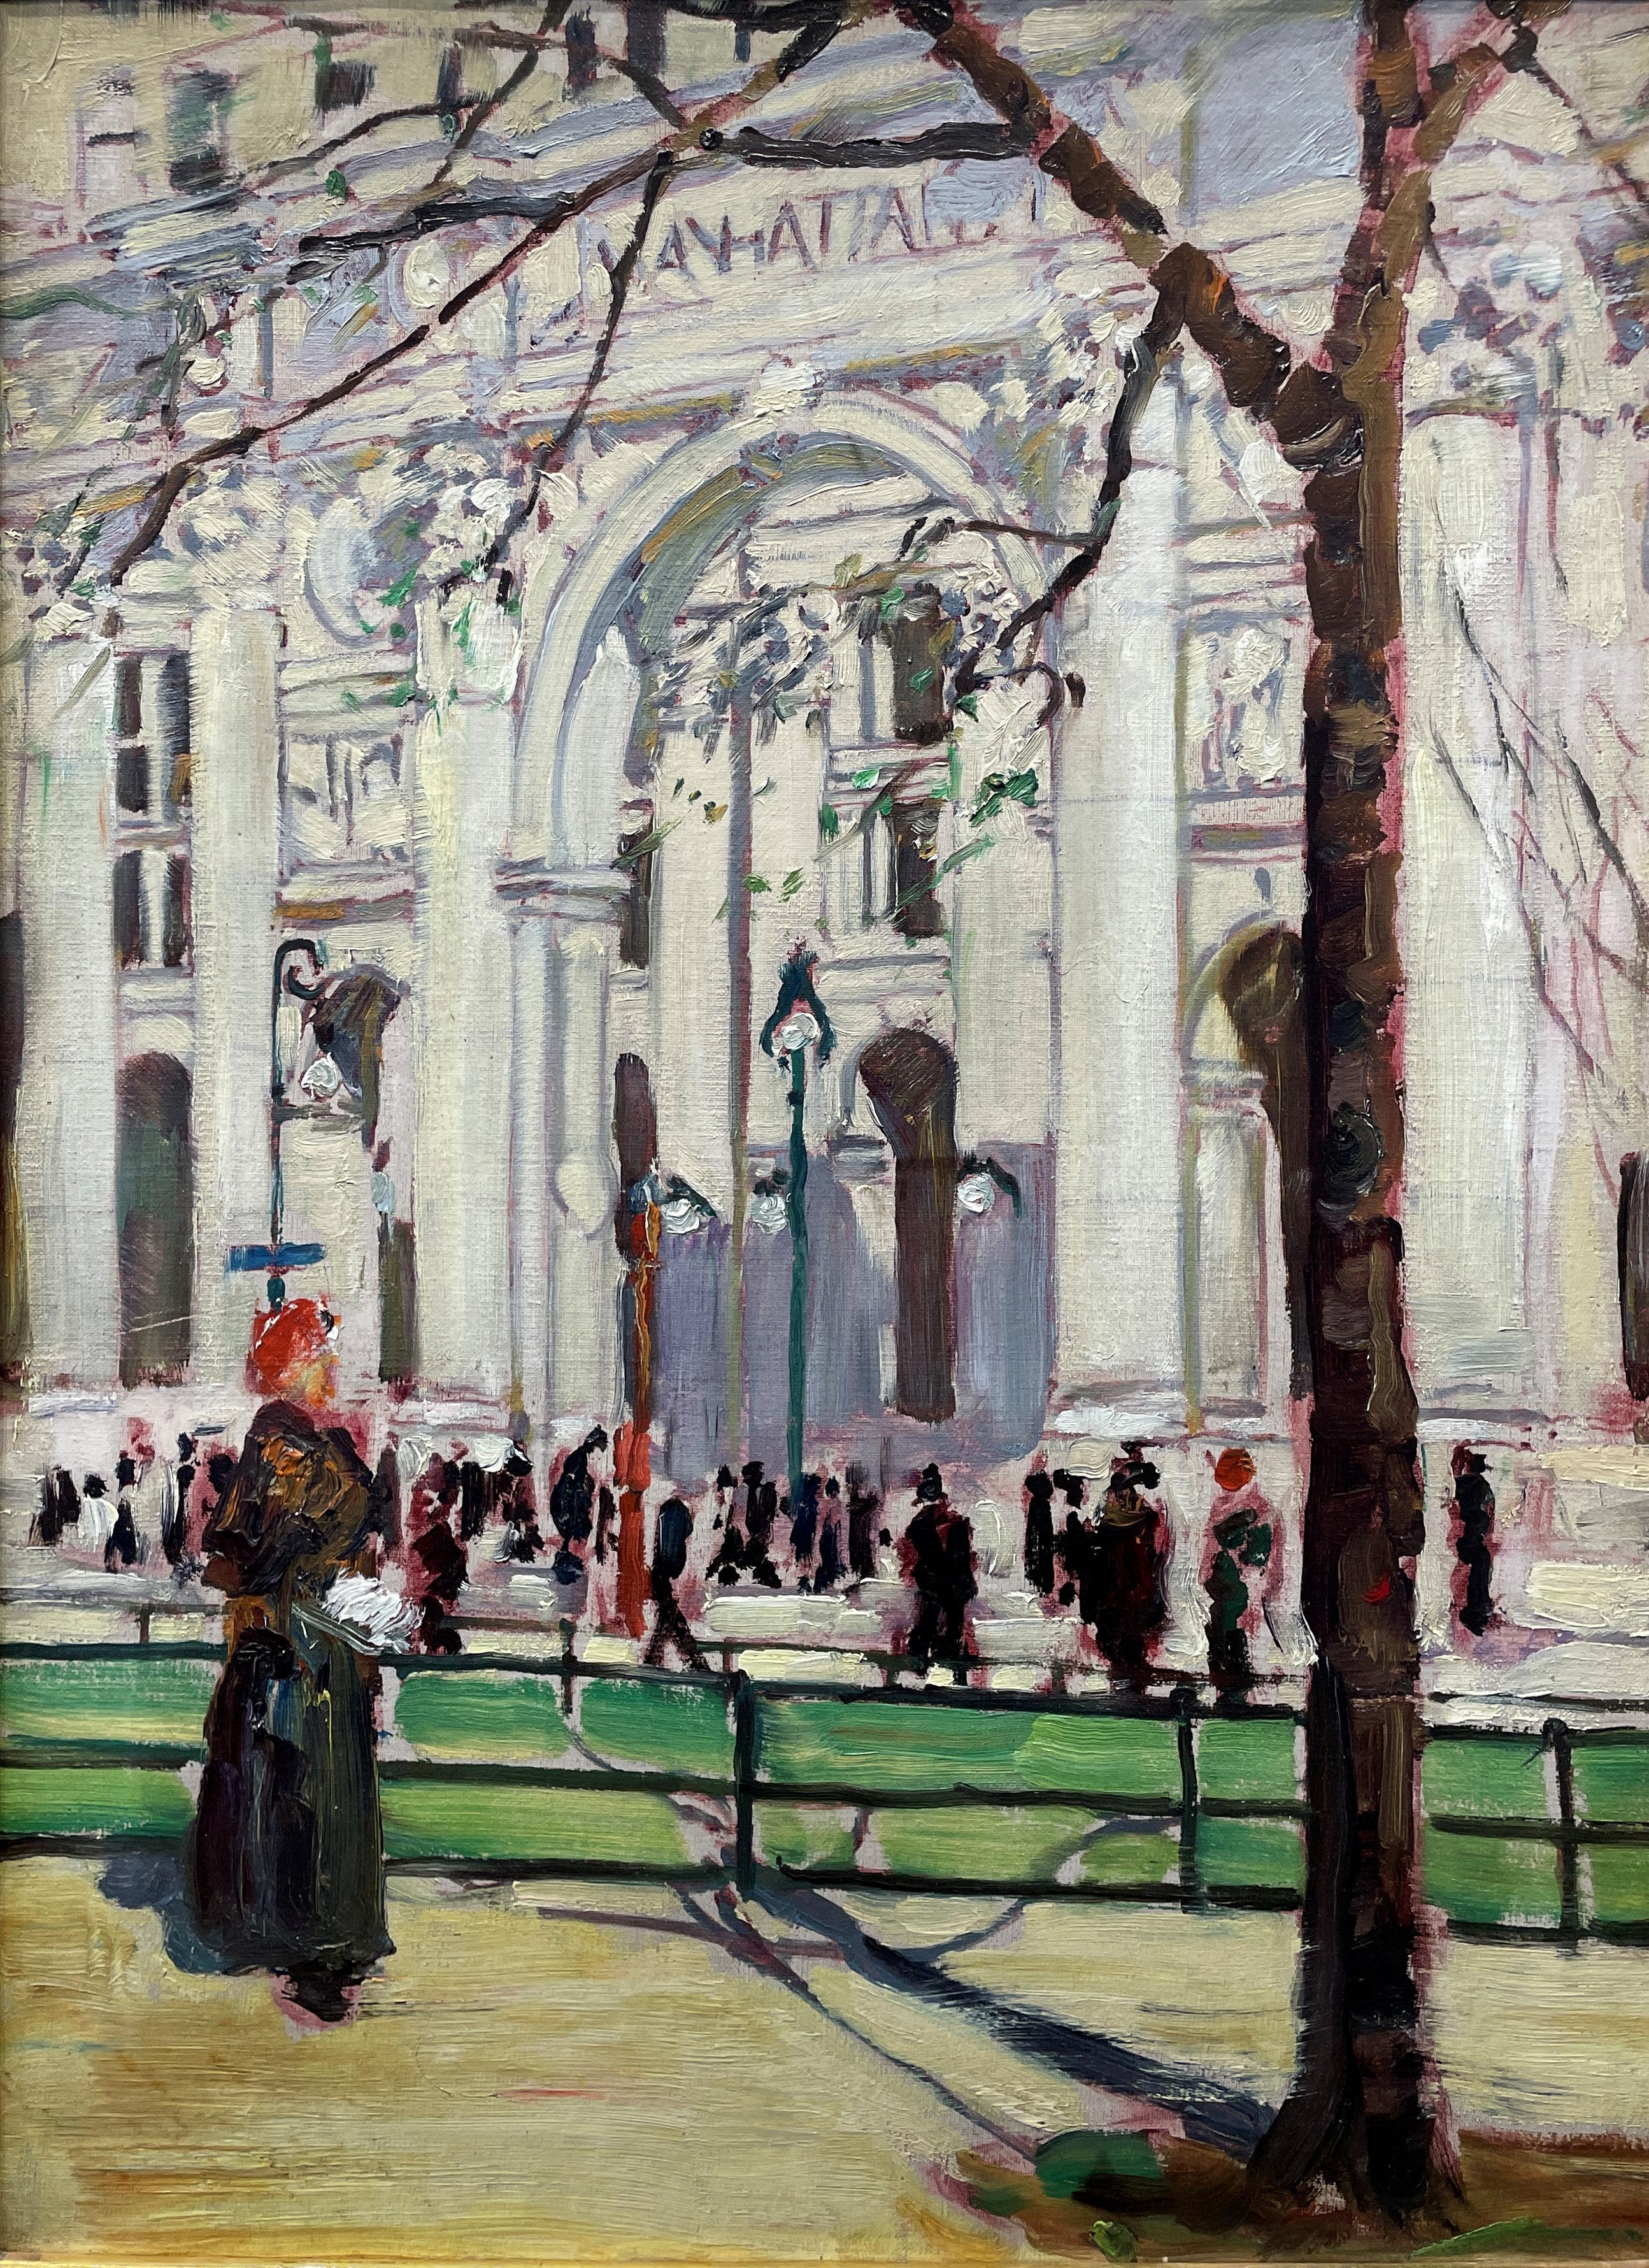 Ruth A. Anderson Figurative Painting - "Municipal Building, Manhattan, New York, " Ruth Anderson, Impressionist Scene